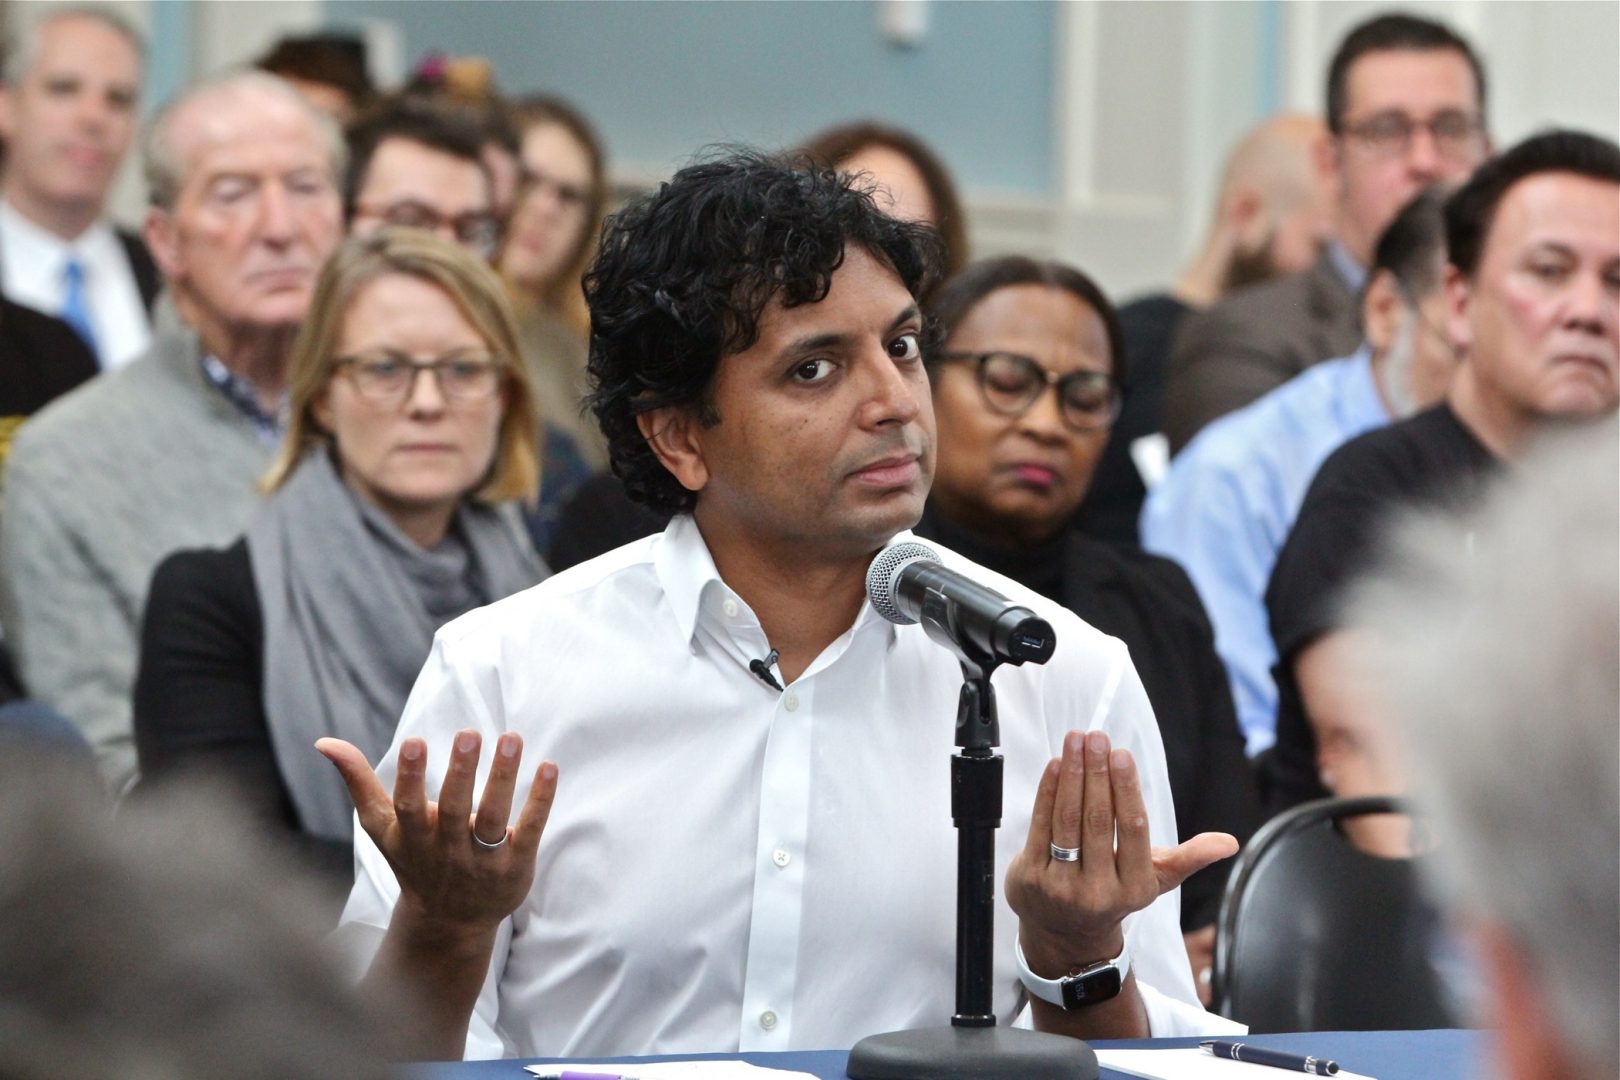 Filmmaker M. Night Shyamalan testifies in support of film tax credits during a hearing before the Pennsylvania House Democratic Policy Committee, held at the Museum of the American Revolution in Philadelphia. 